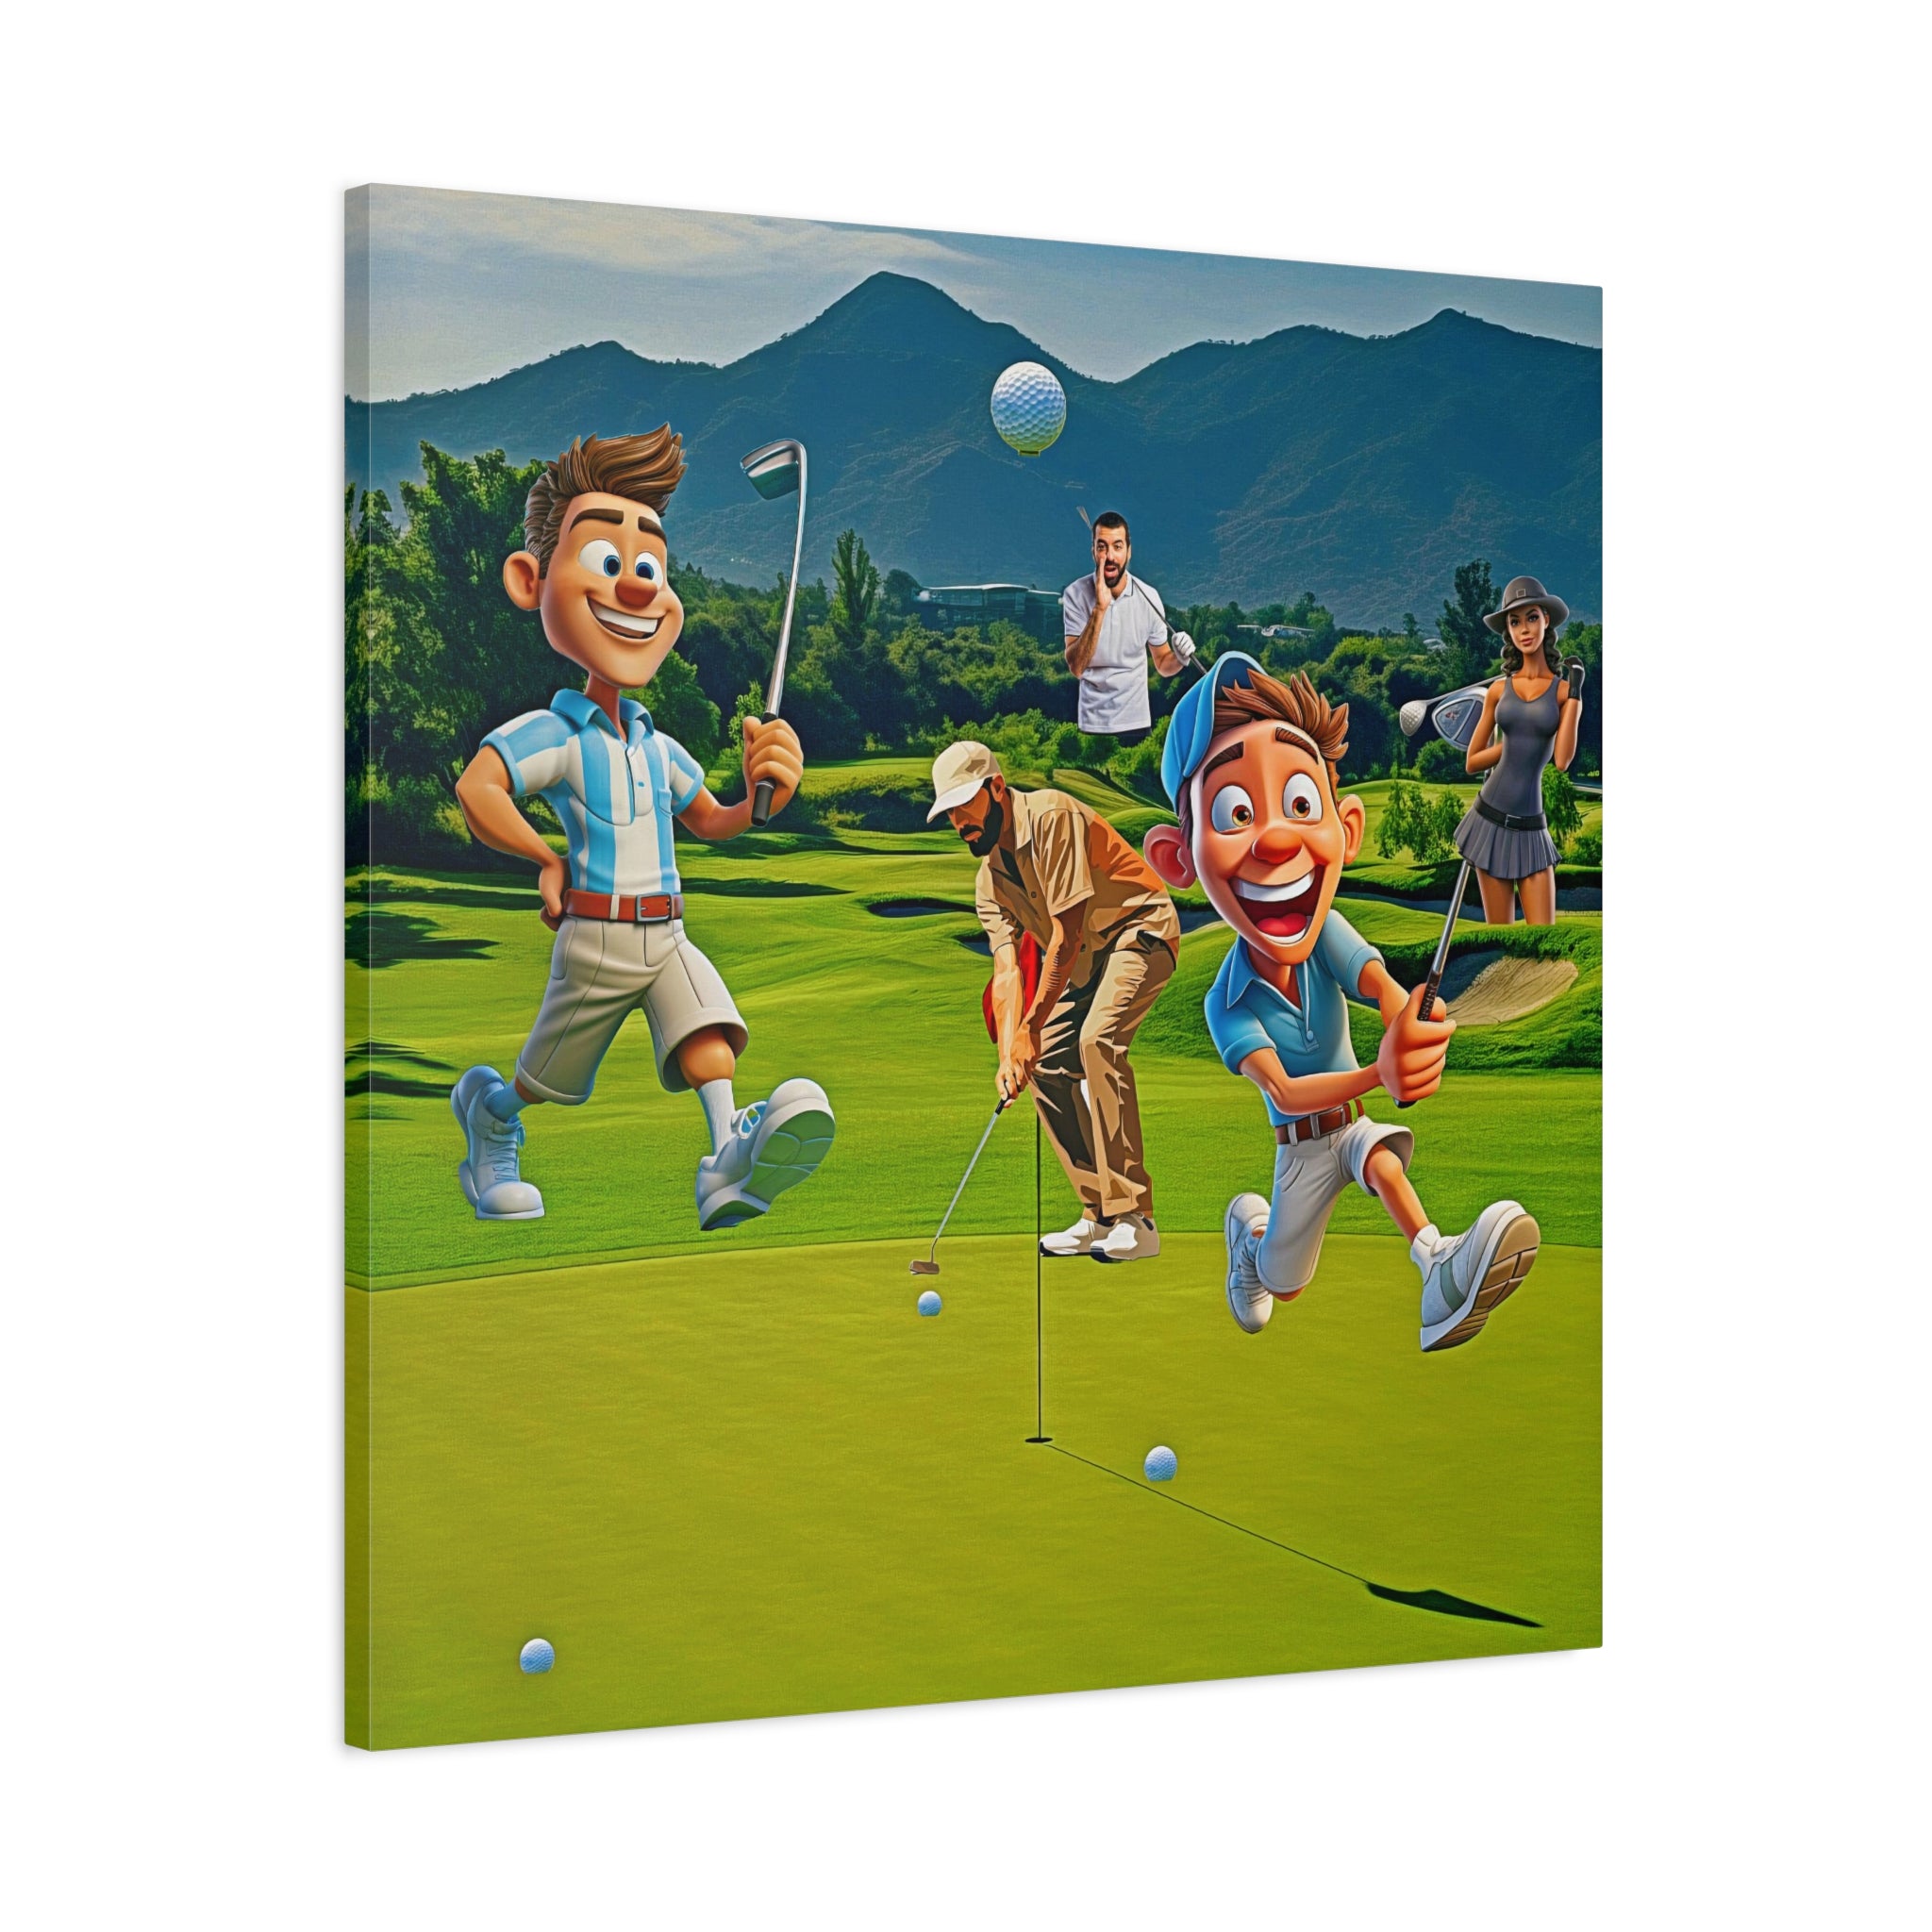 Wall Art FORE Golf Canvas Print Art Painting Original Giclee GW Love Nice Beauty Fun Design Fit Sport Hot House Home Office Gift Ready Hang